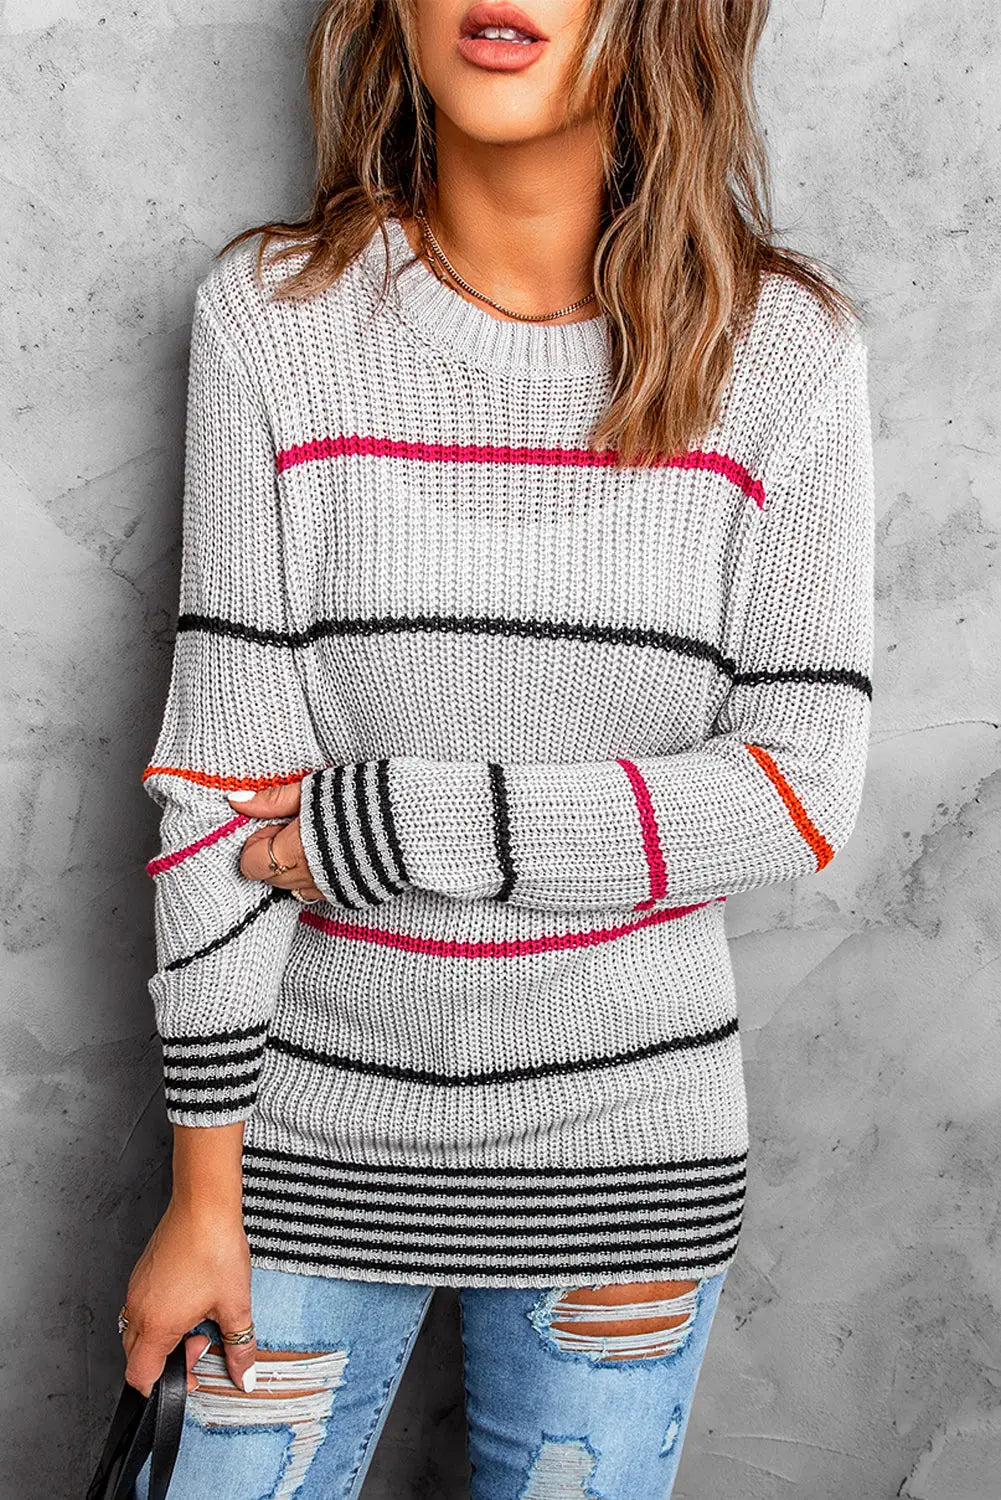 Gray ribbed knit striped sweater - sweaters & cardigans